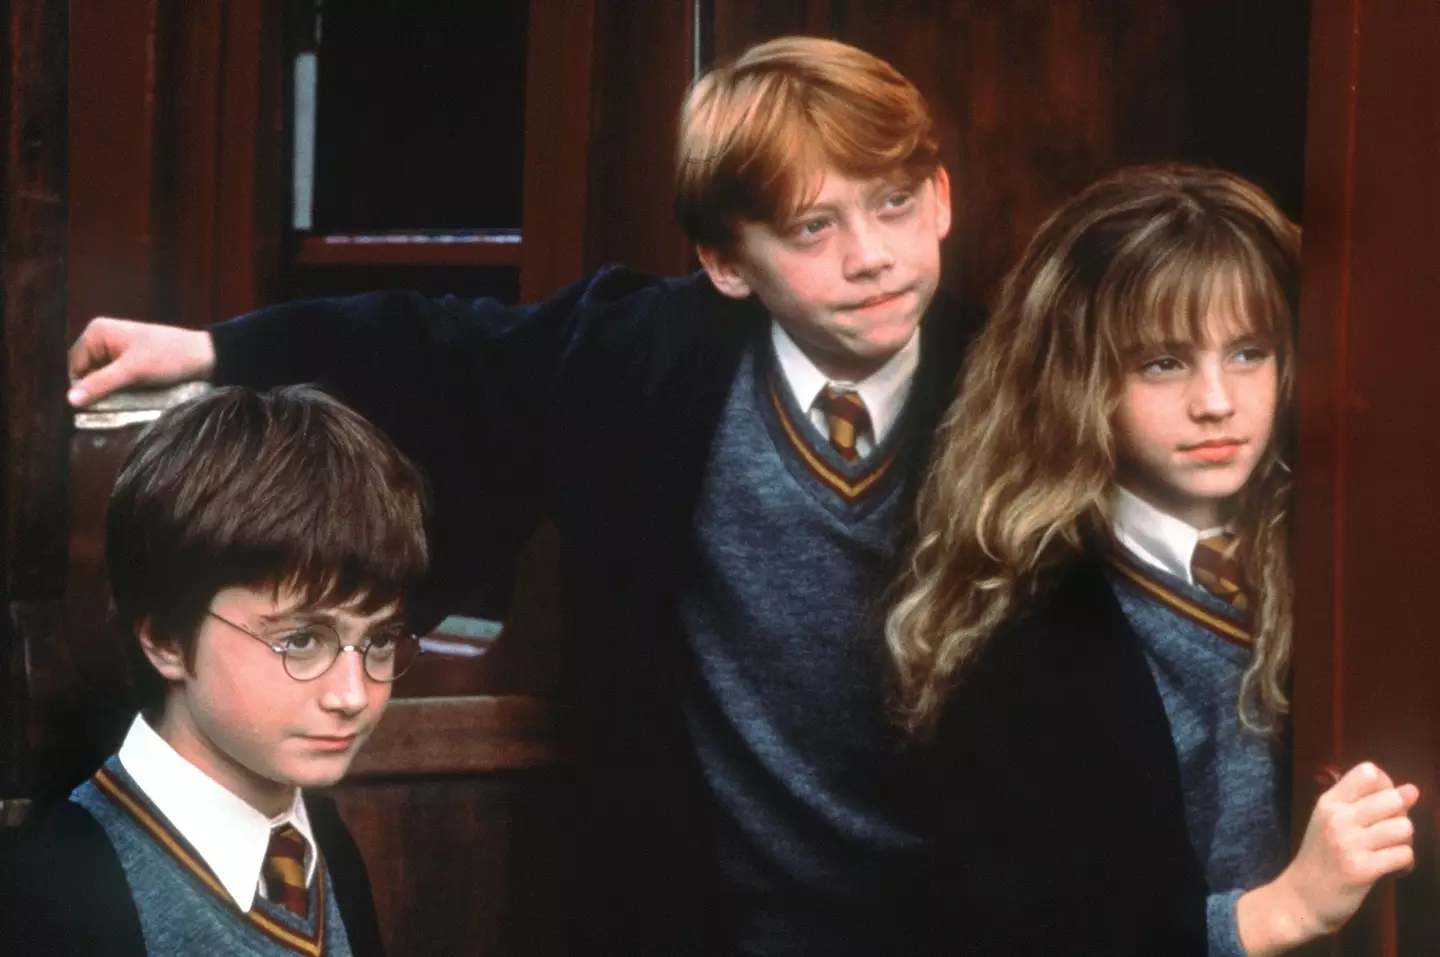 Daniel Radcliffe, Rupert Grint and Emma Watson in Harry Potter and the Philosopher's Stone. (